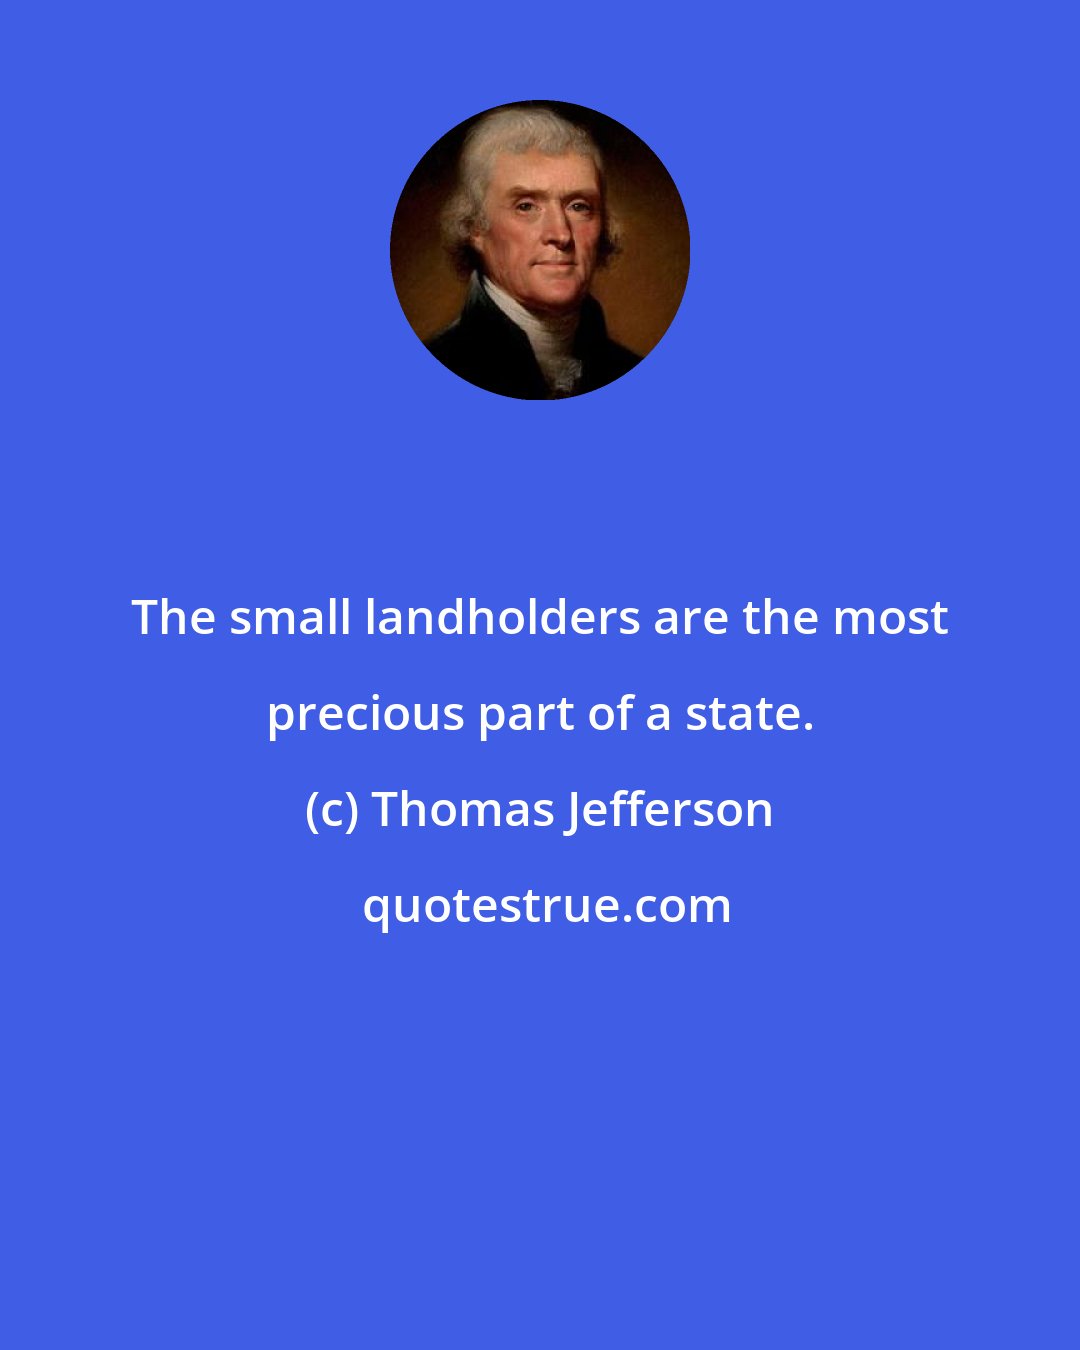 Thomas Jefferson: The small landholders are the most precious part of a state.